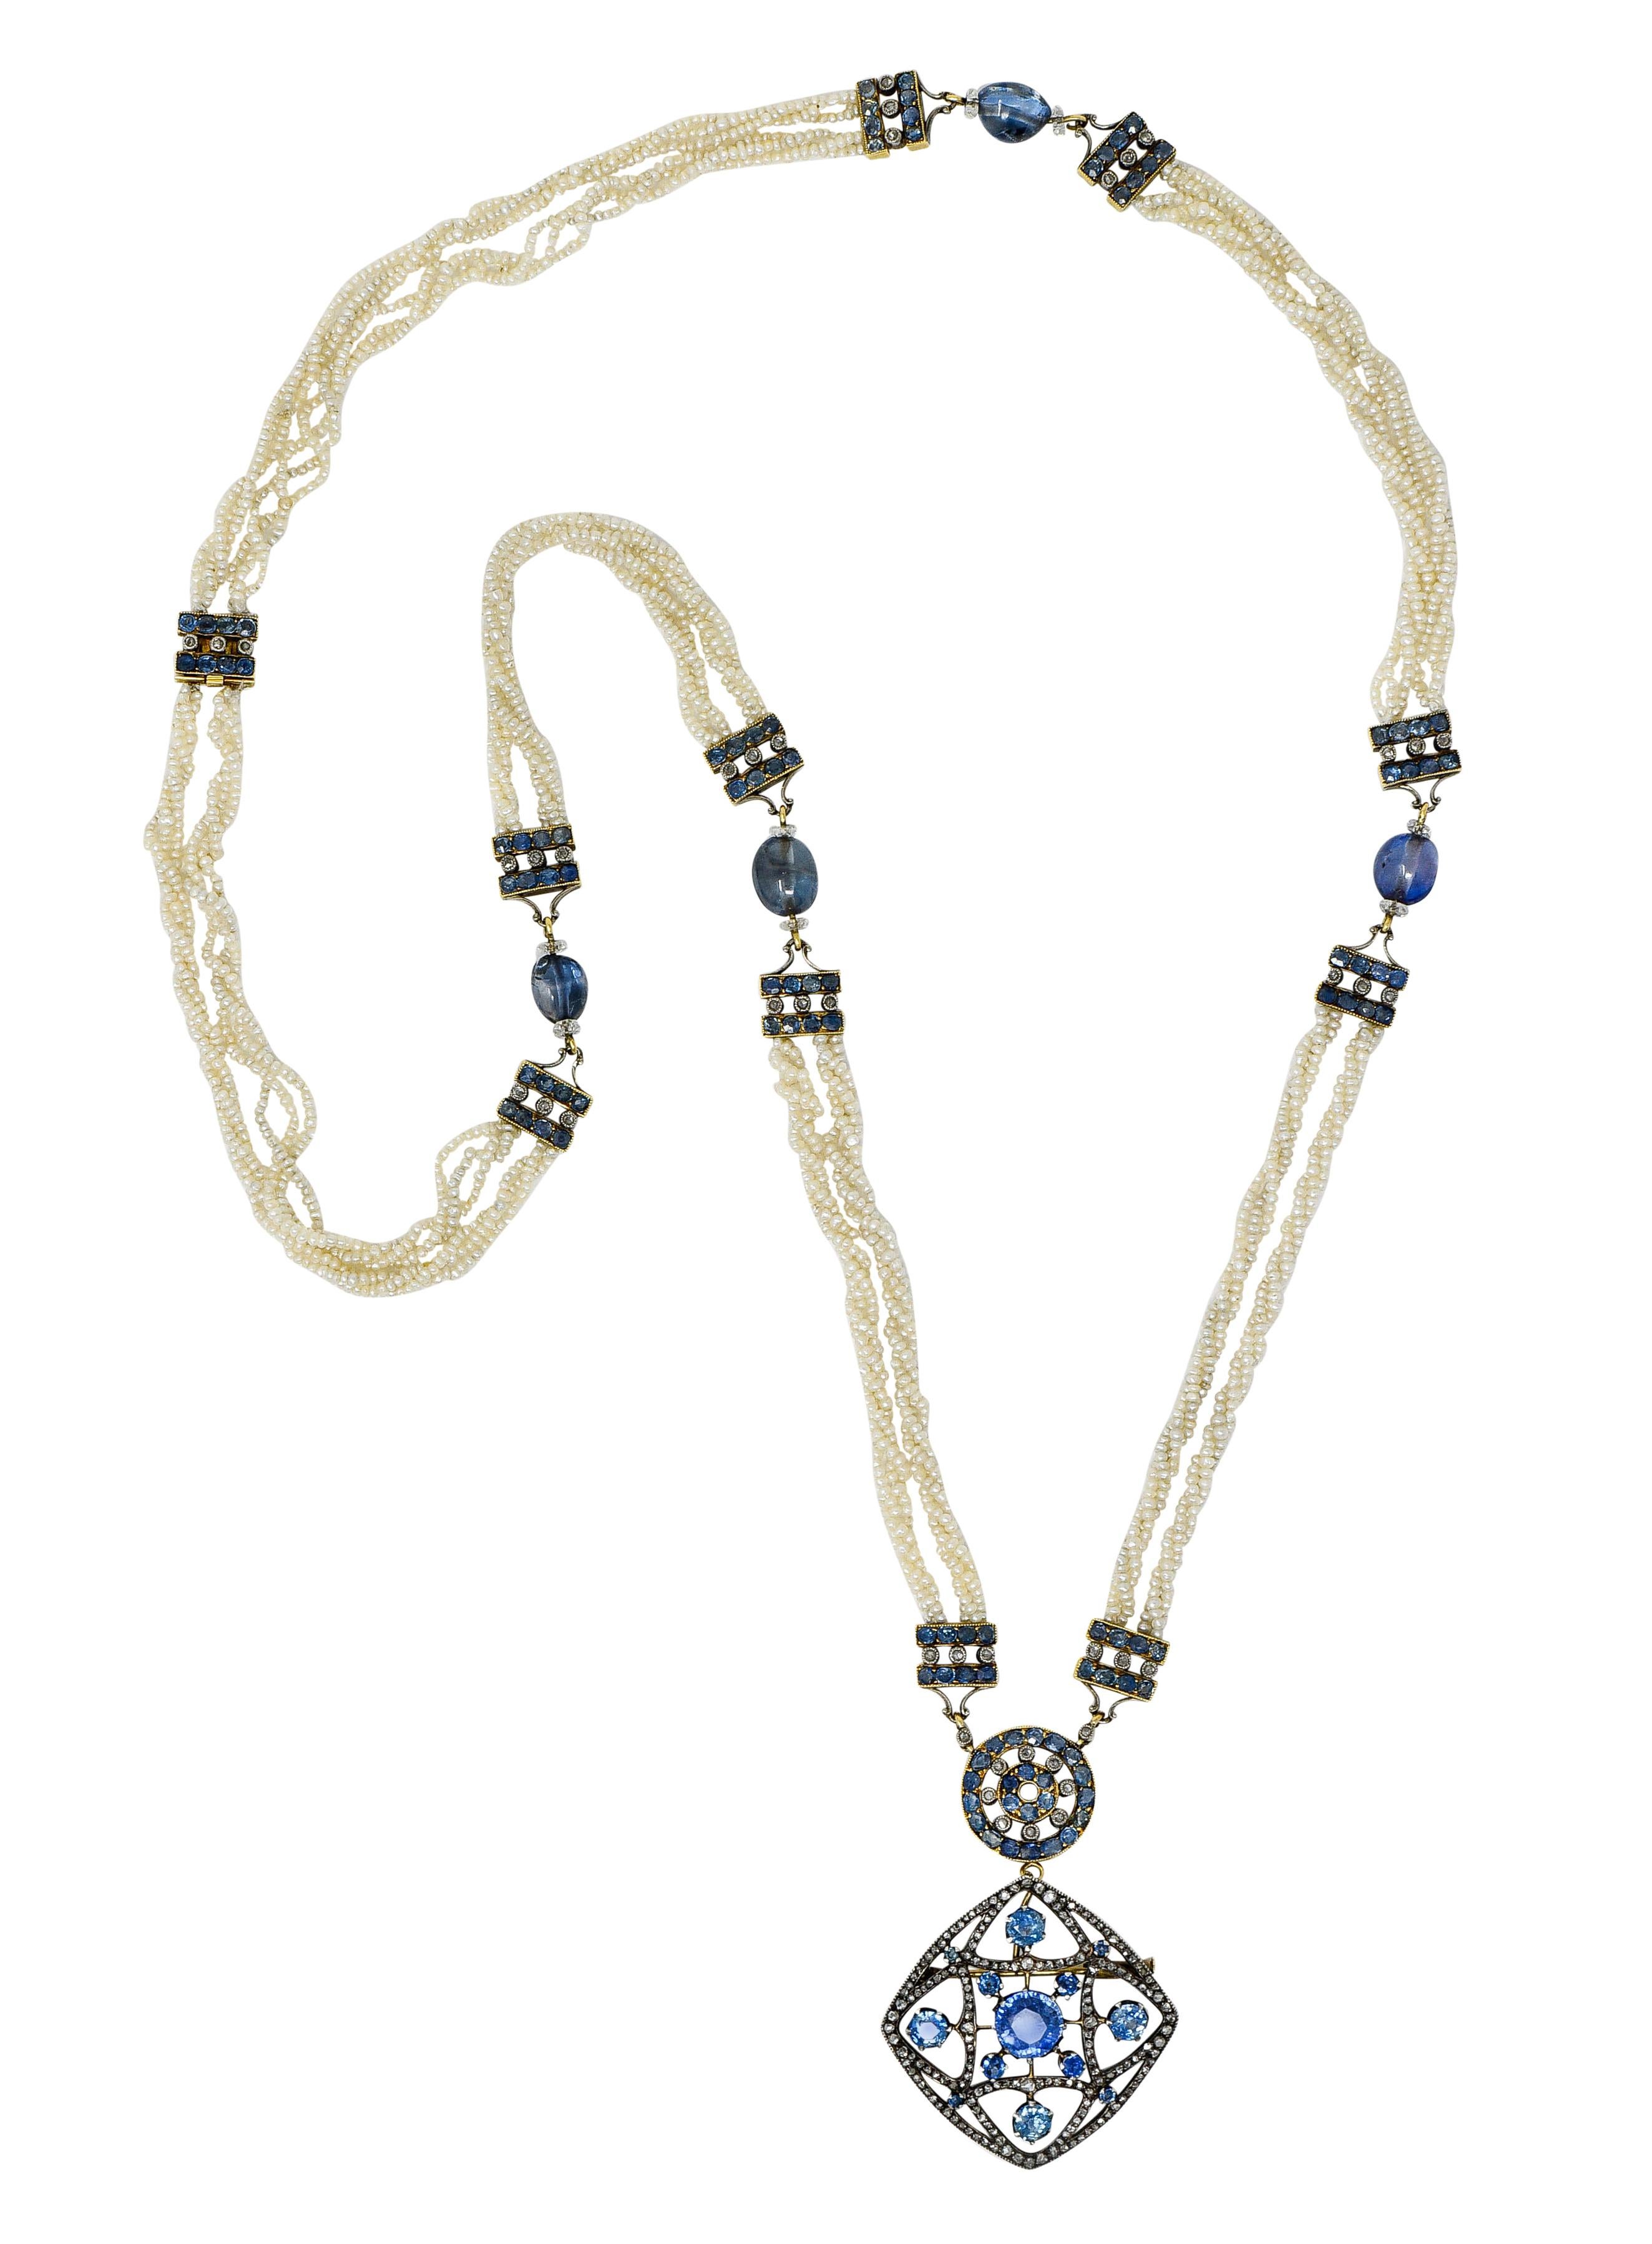 Multi-strand necklace is comprised of 1.6 mm freshwater natural pearl beads; well-matched and white

With rectangular stations throughout accented by rose cut diamonds and round cut sapphires

With additional stations of tumbled sapphire beads